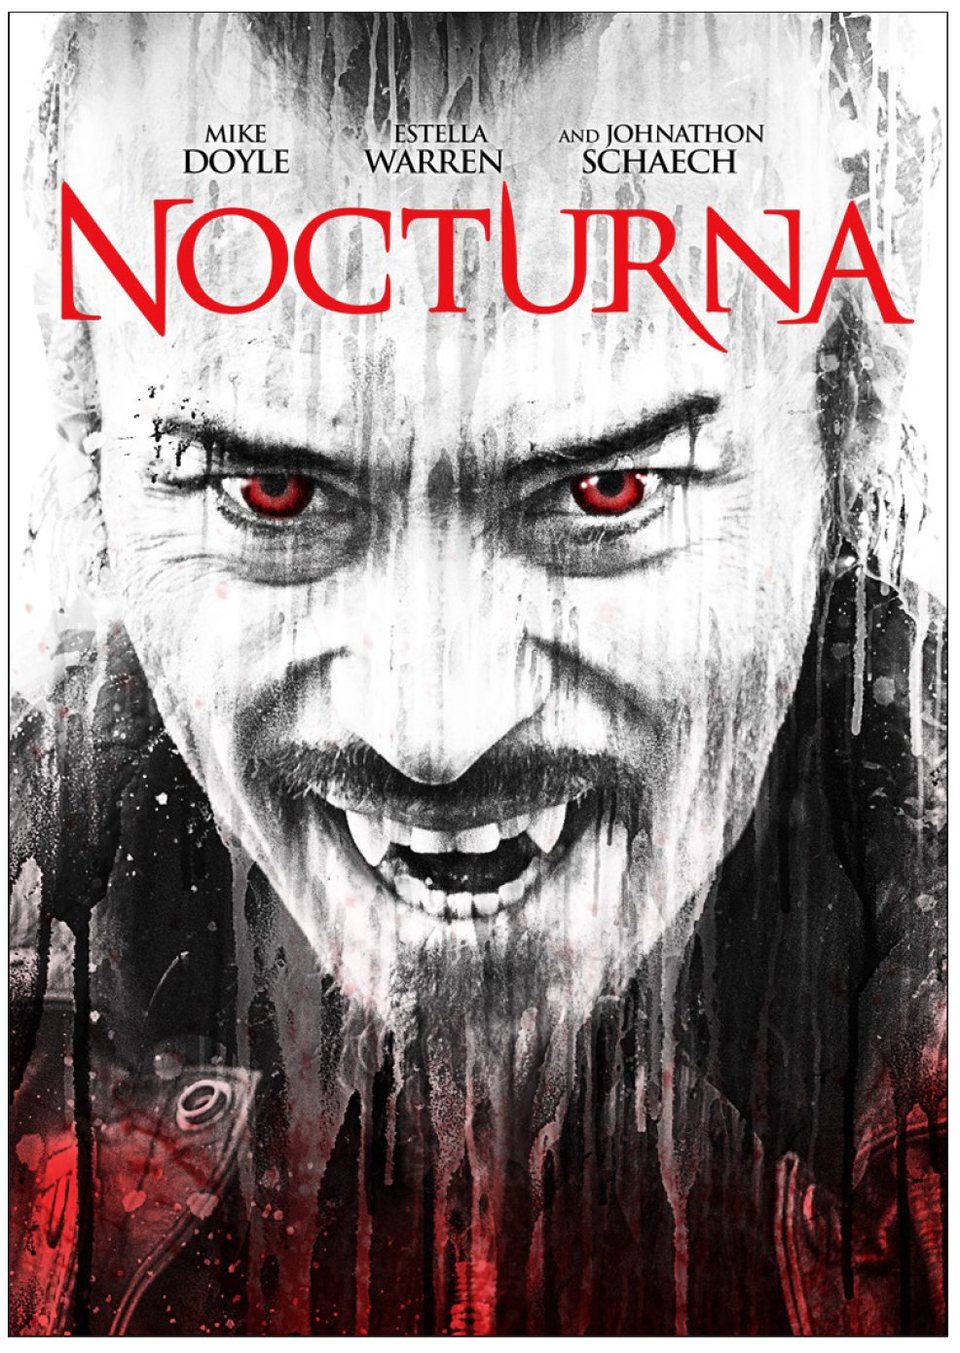 Poster of Nocturna - Póster 'Nocturna'